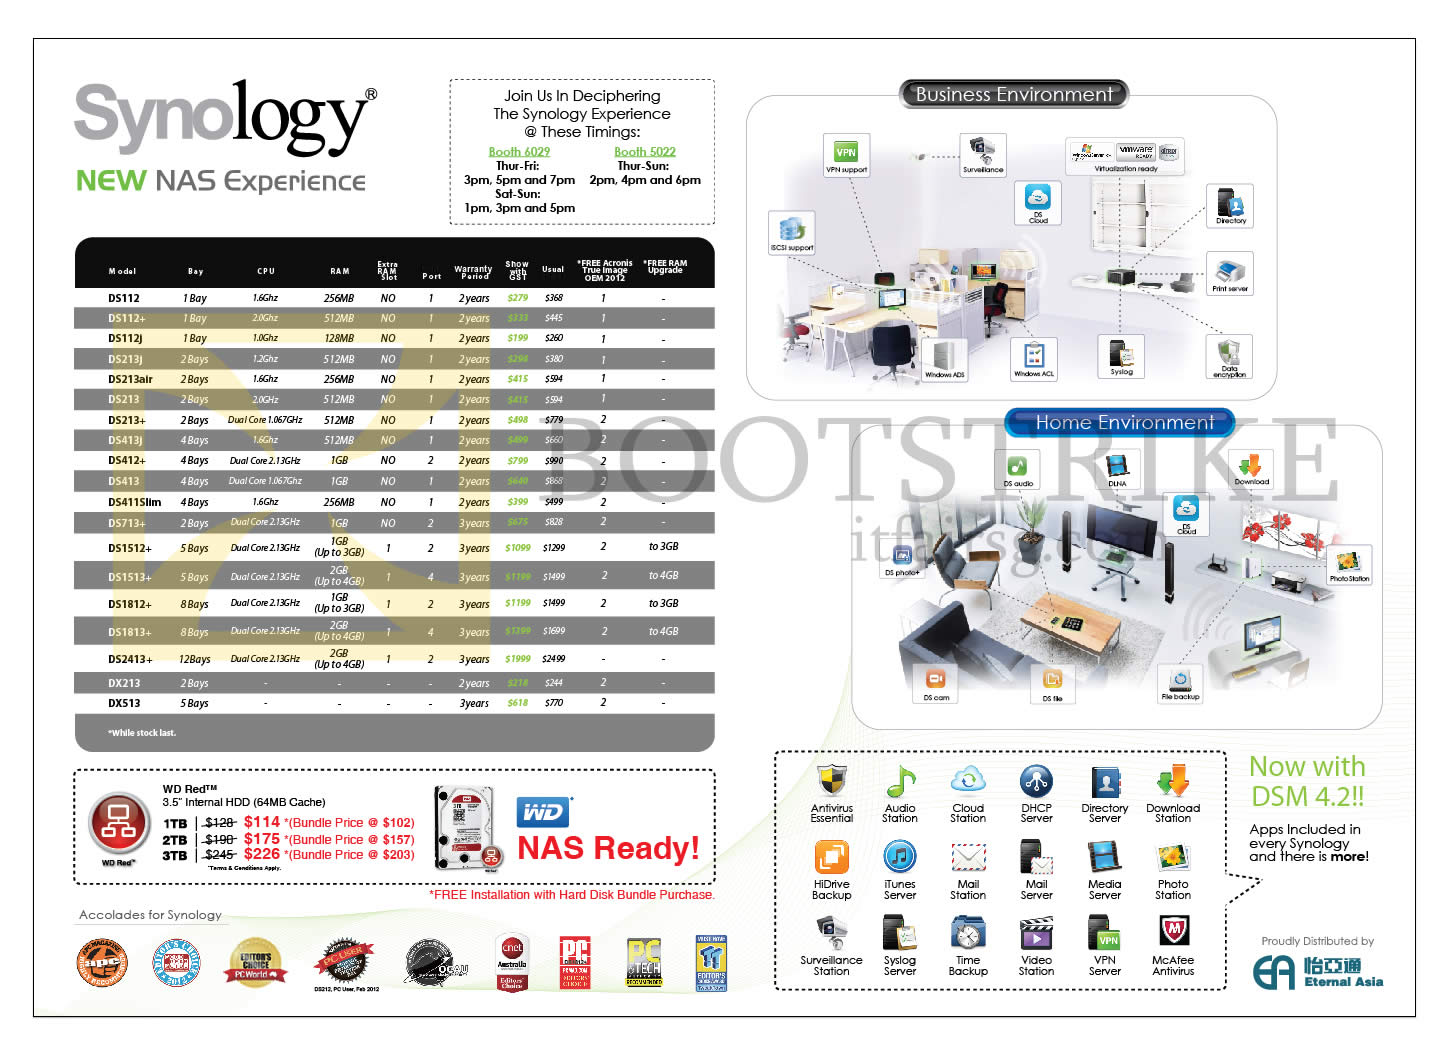 PC SHOW 2013 price list image brochure of Eternal Asia Synology NAS External Storage DS112, DS112j, DS213j, DS213alr, DS413, DS412, DS713, DS1512, DS1513, DS1812, DS1813, DS2413, DX213